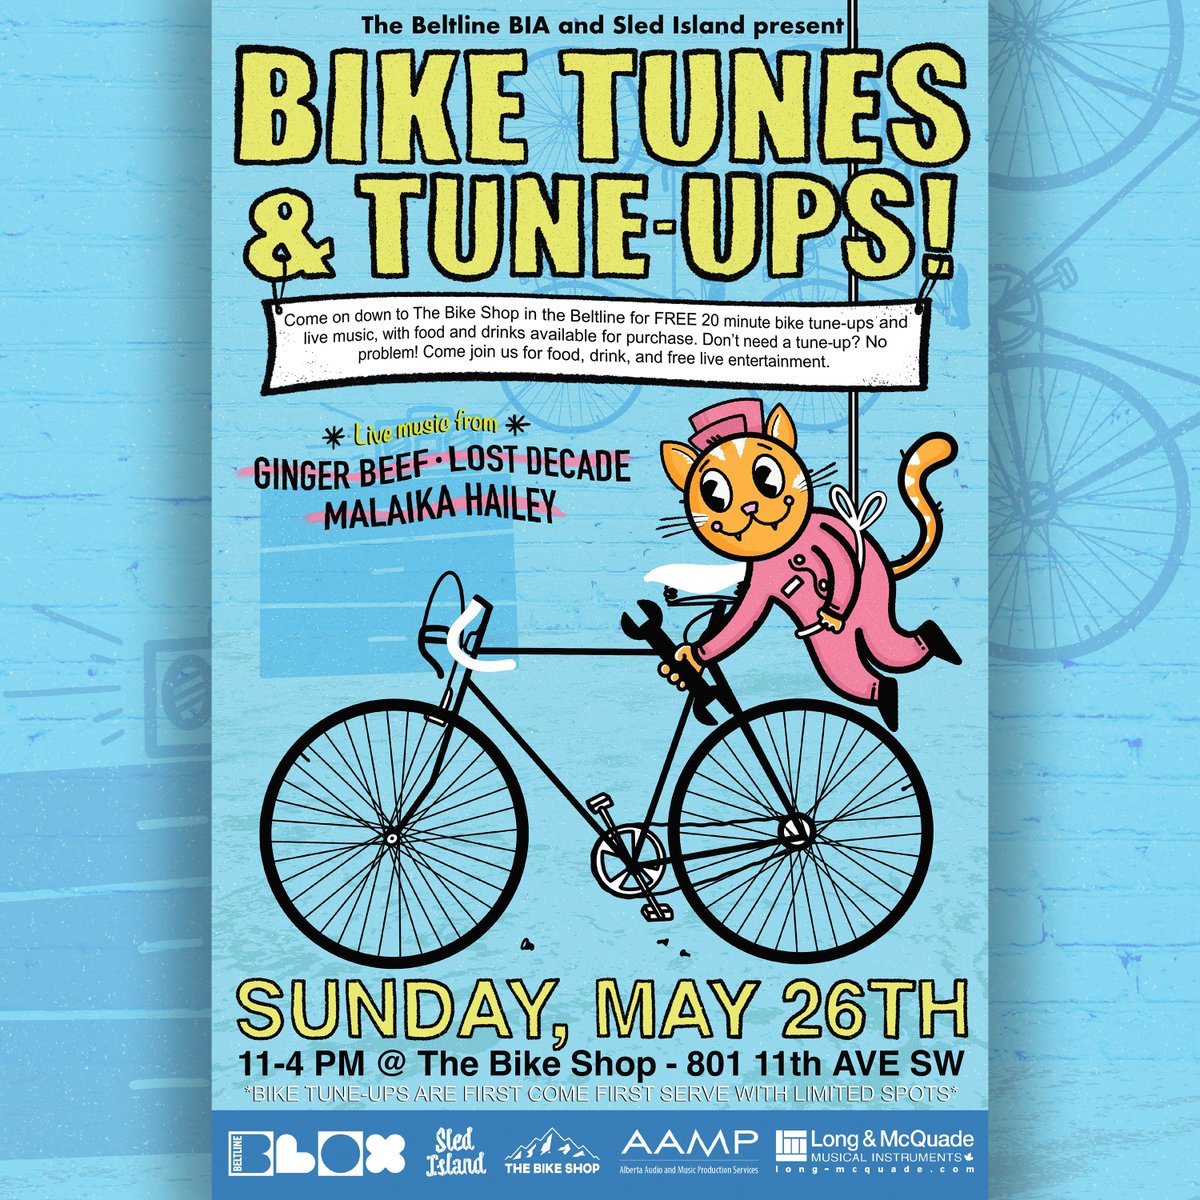 Get your bike summer-ready with Bike Tunes & Tune-Ups, presented by The BLOX, @sledisland, and The Bike Shop! Come on by The Bike Shop May 26 from 11 - 4 for a FREE 30-minute bike tuneup, plus beer gardens, food trucks, and music from Ginger Beef, Lost Decade & Malaika Hailey.